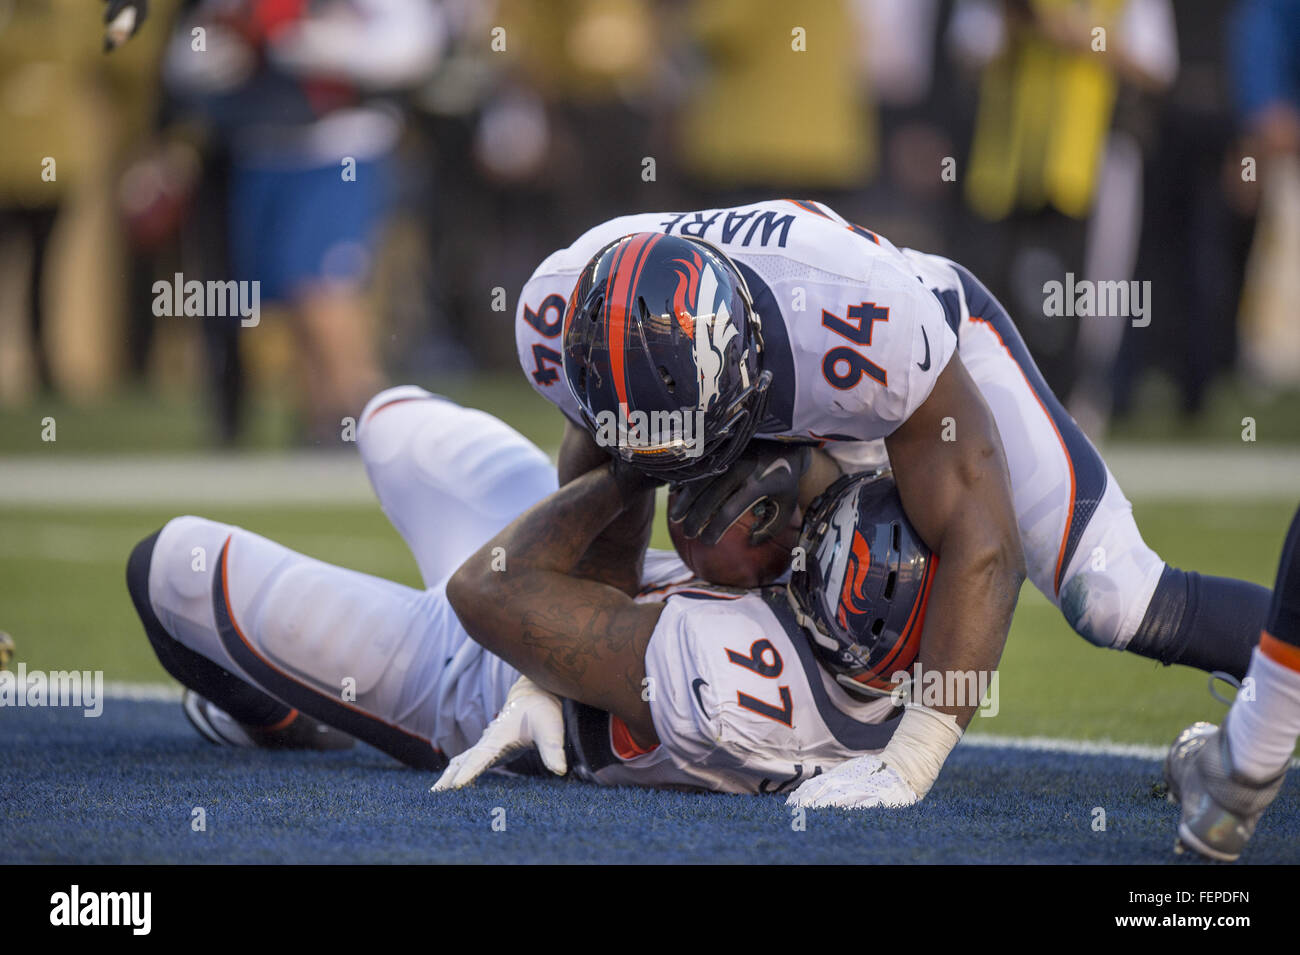 Feb. 7, 2016 - Santa Clara, California, USA - Denver Broncos defensive end Malik Jackson (97) is hugged by teammate Denver Broncos outside linebacker DeMarcus Ware (94) after recovering a Cam Newton fumble in the first quarter in Super Bowl 50 on Sunday, February 7, 2016 at Levi's Stadium in Santa Clara, Calif (Credit Image: © Jose Luis Villegas/Sacramento Bee via ZUMA Wire) Stock Photo